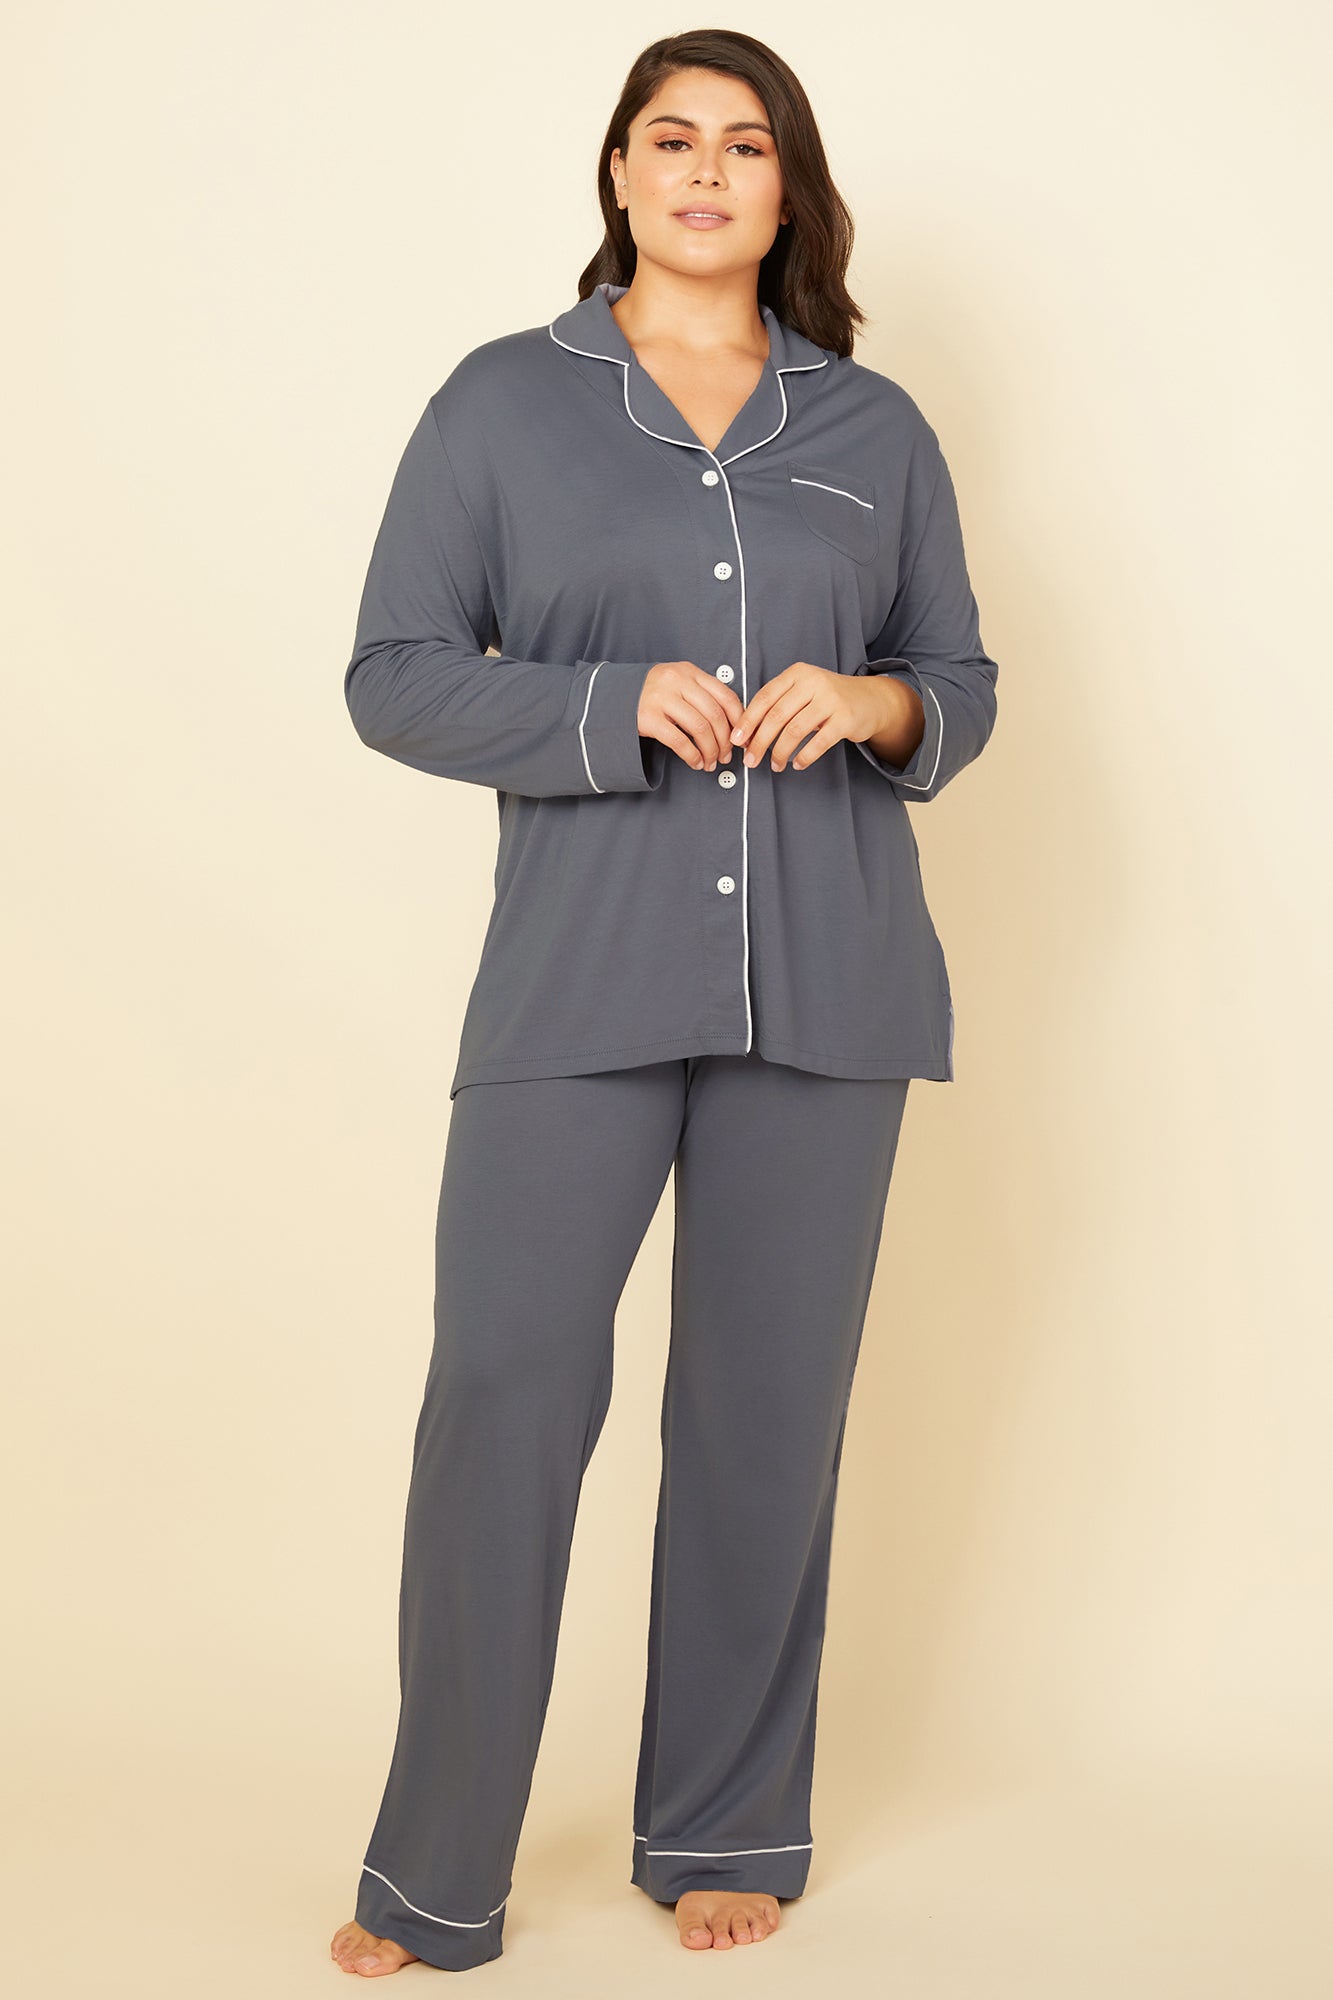 Relaxed Long Sleeve Top & Pant